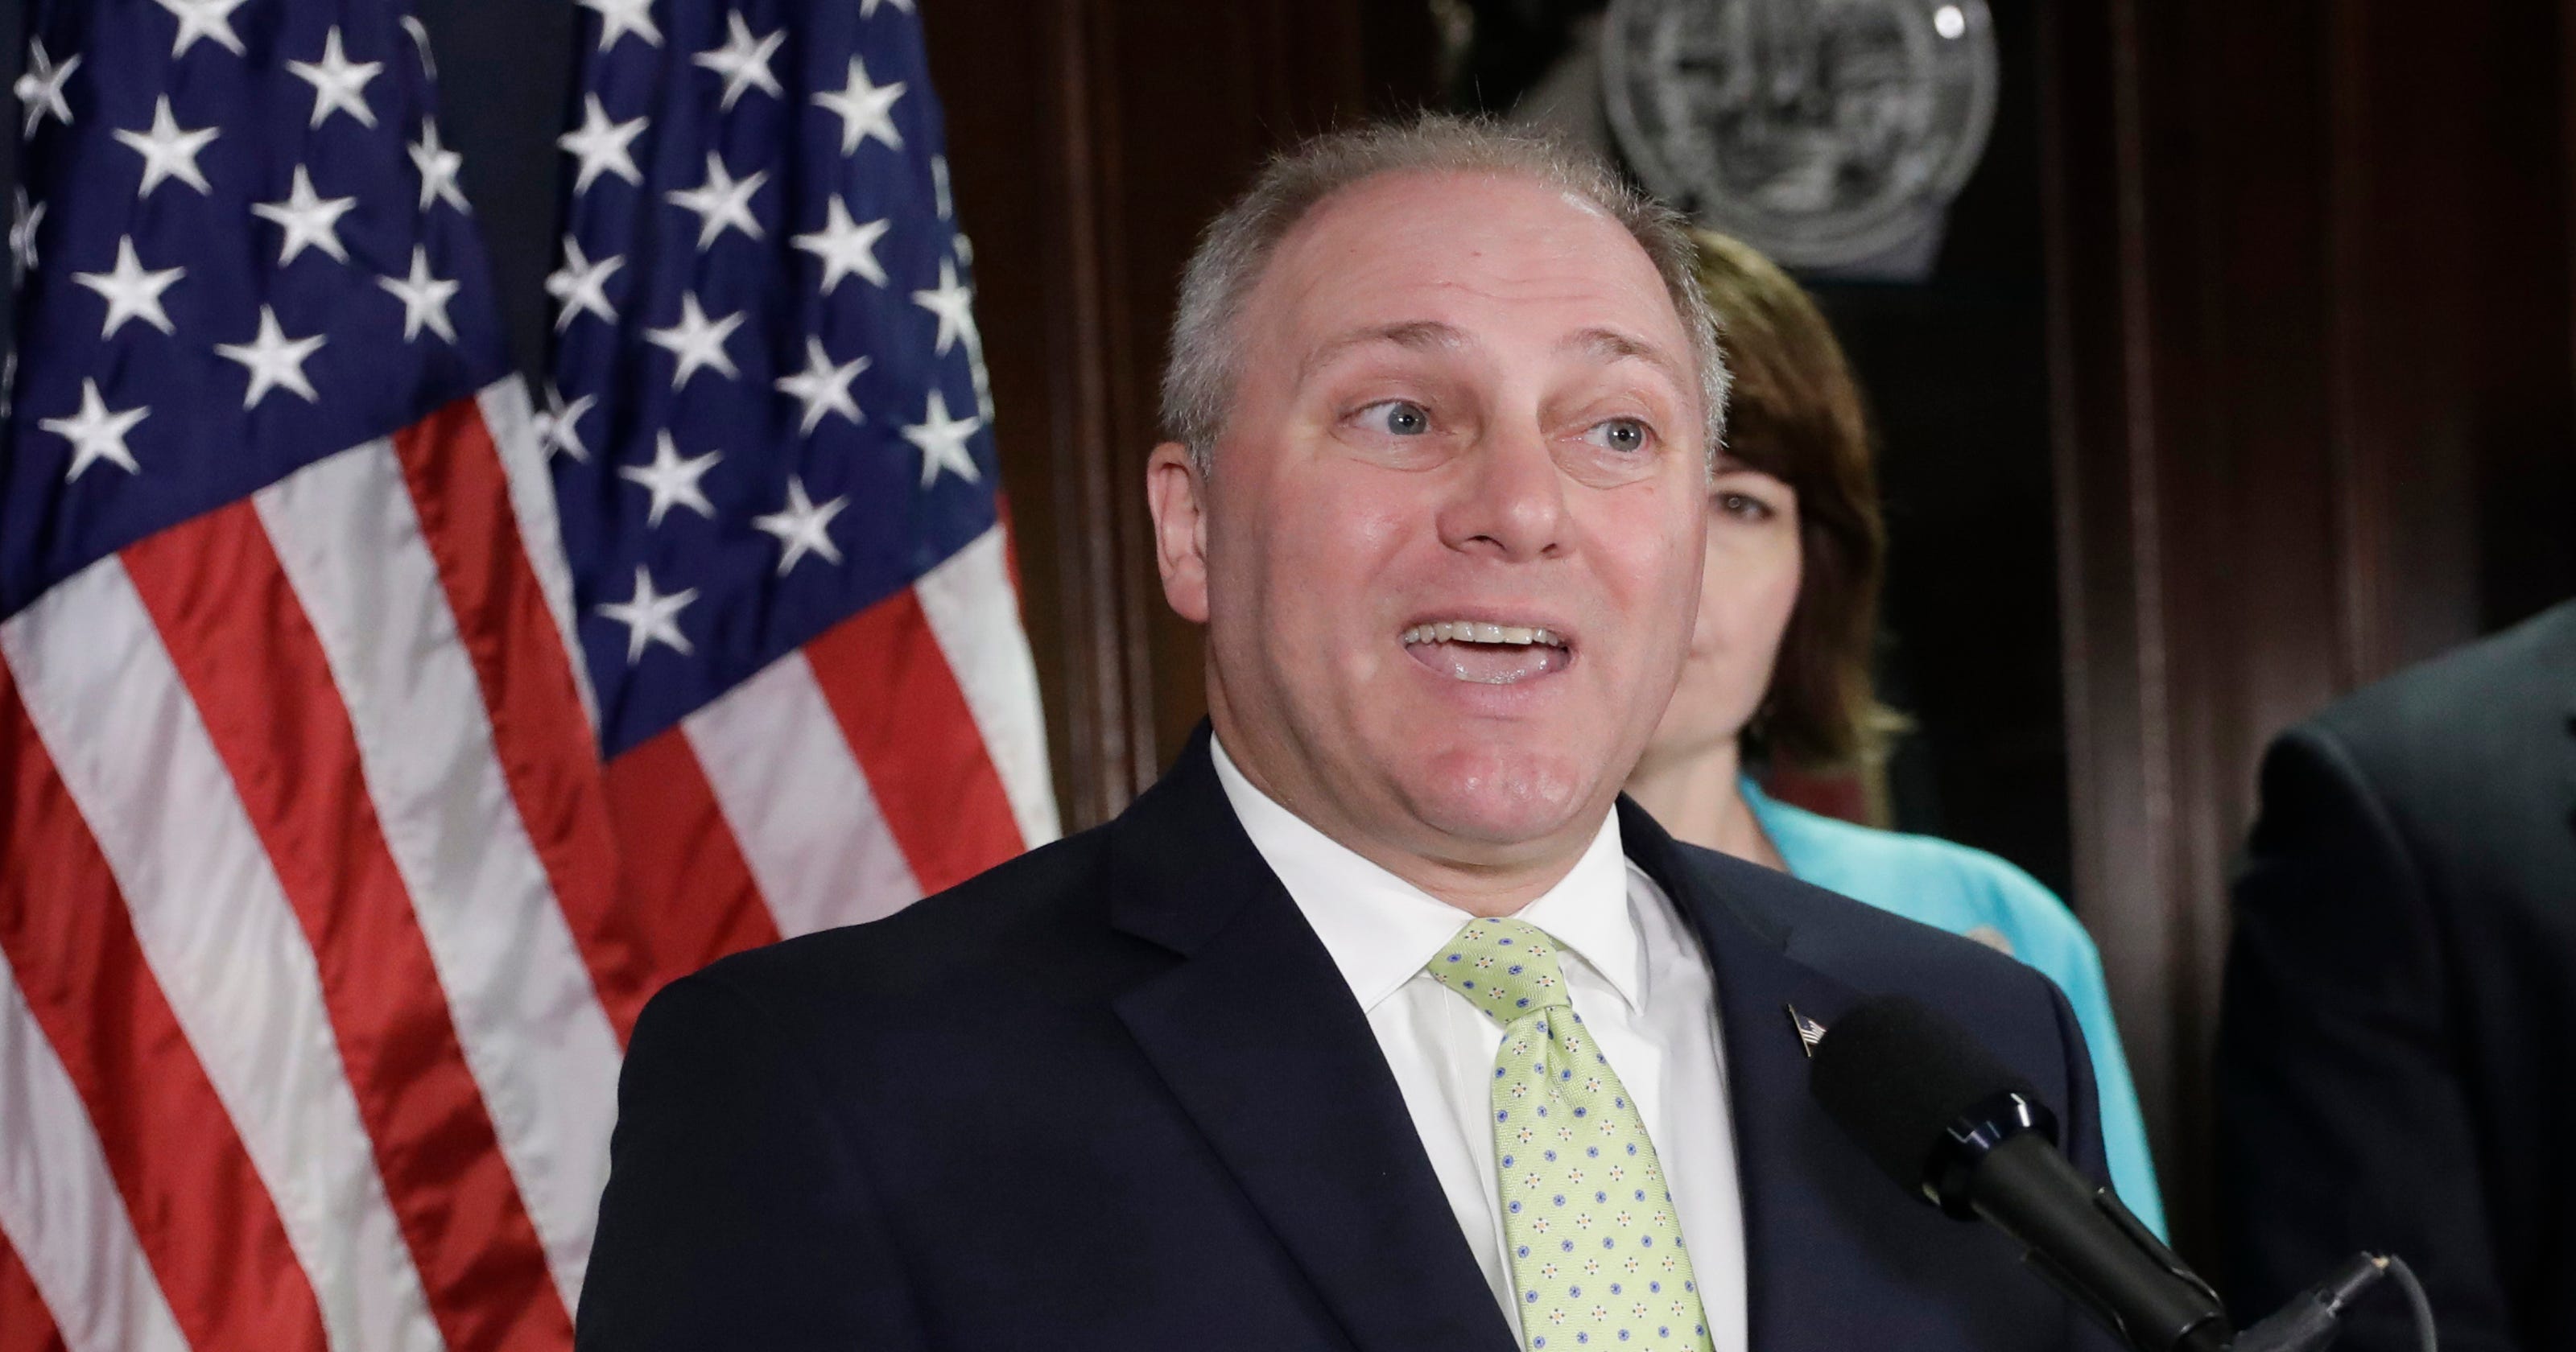 Rep Steve Scalise Is Now In Fair Condition